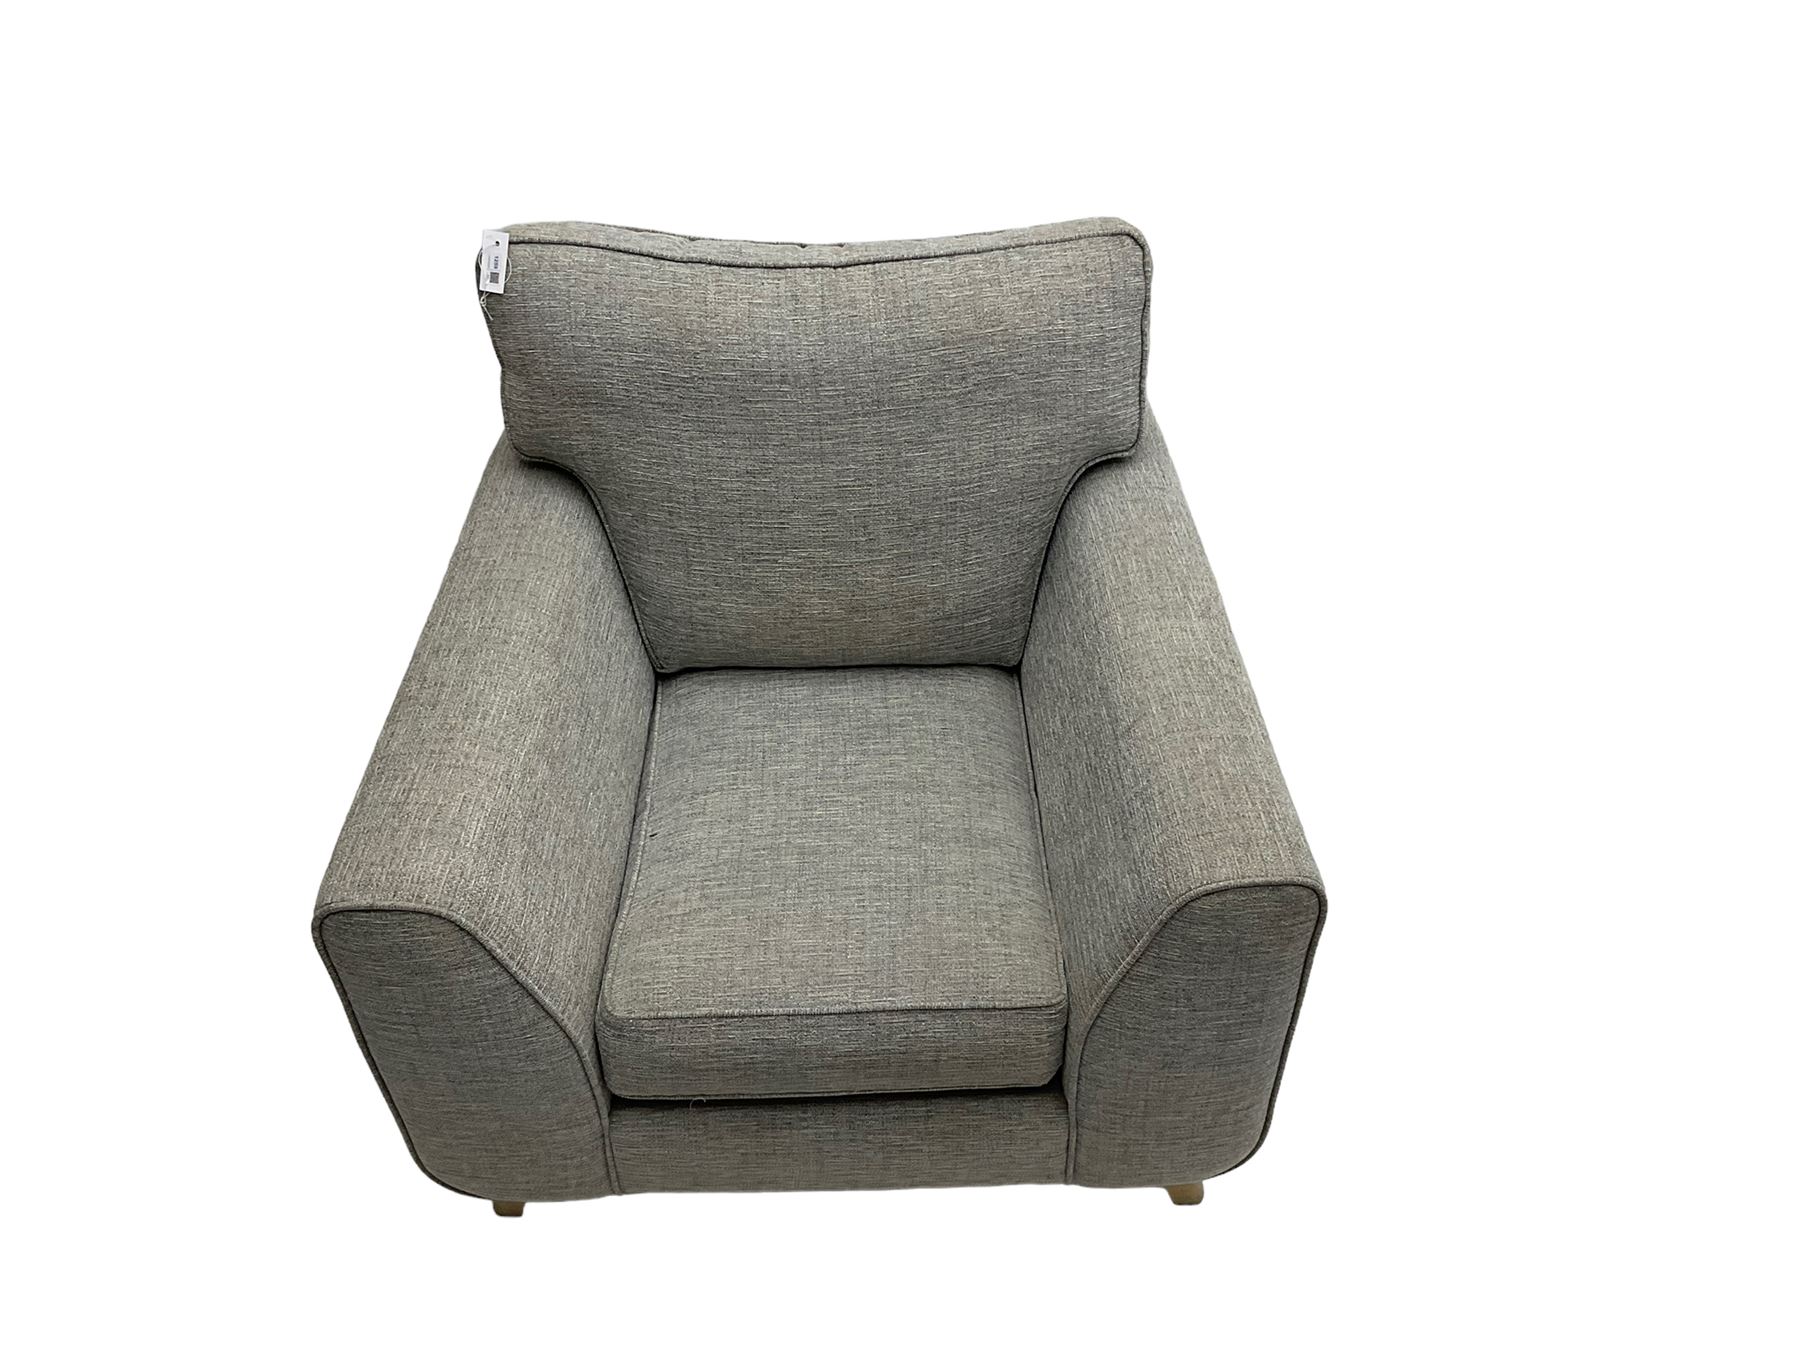 Armchair upholstered in graphite grey fabric - Image 7 of 7